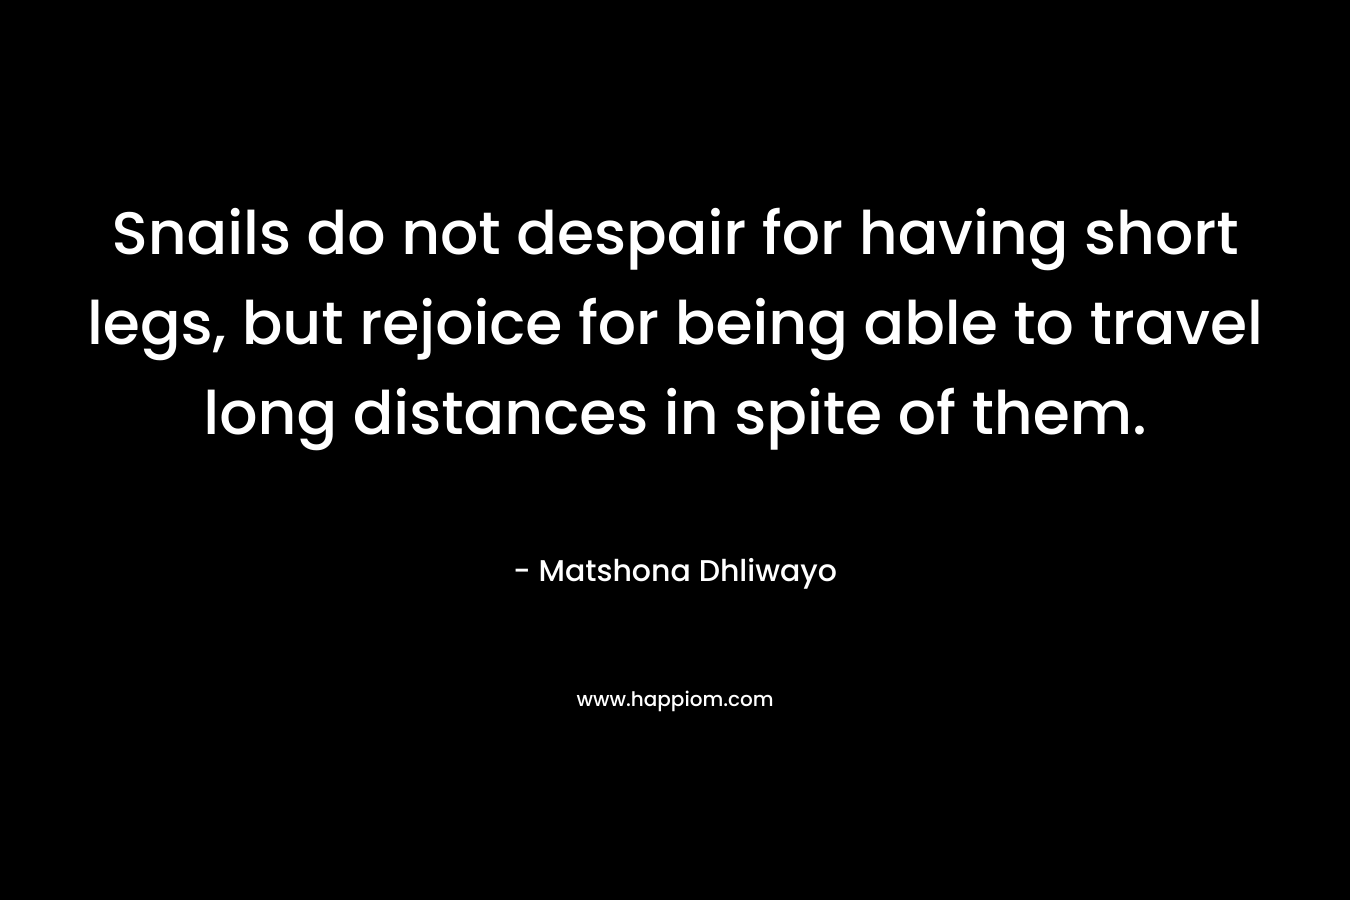 Snails do not despair for having short legs, but rejoice for being able to travel long distances in spite of them. – Matshona Dhliwayo